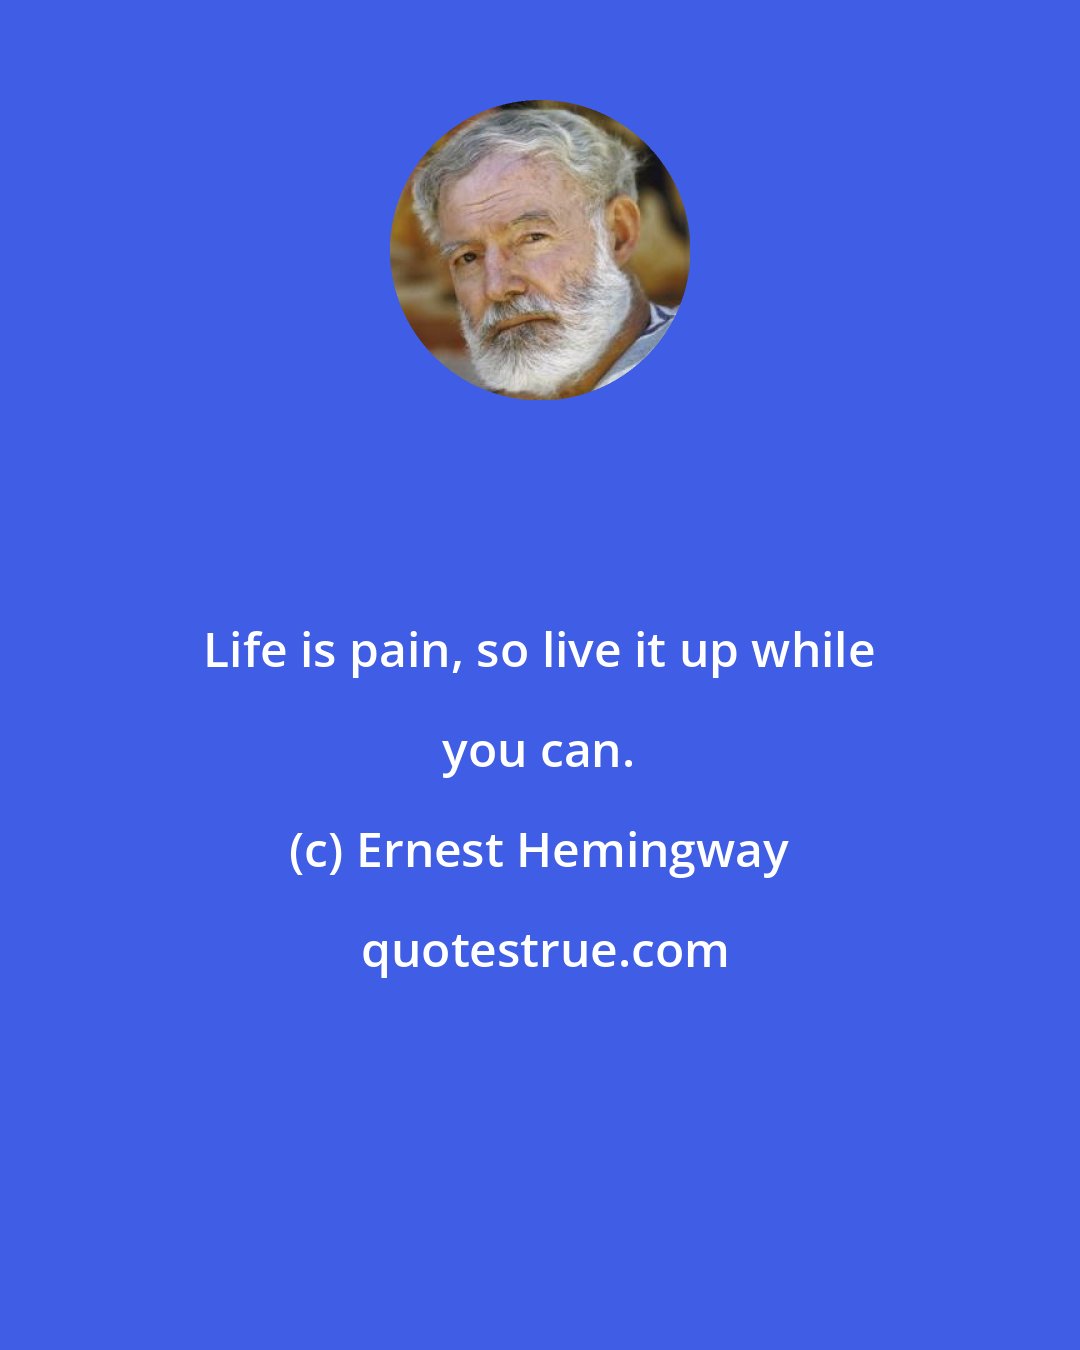 Ernest Hemingway: Life is pain, so live it up while you can.